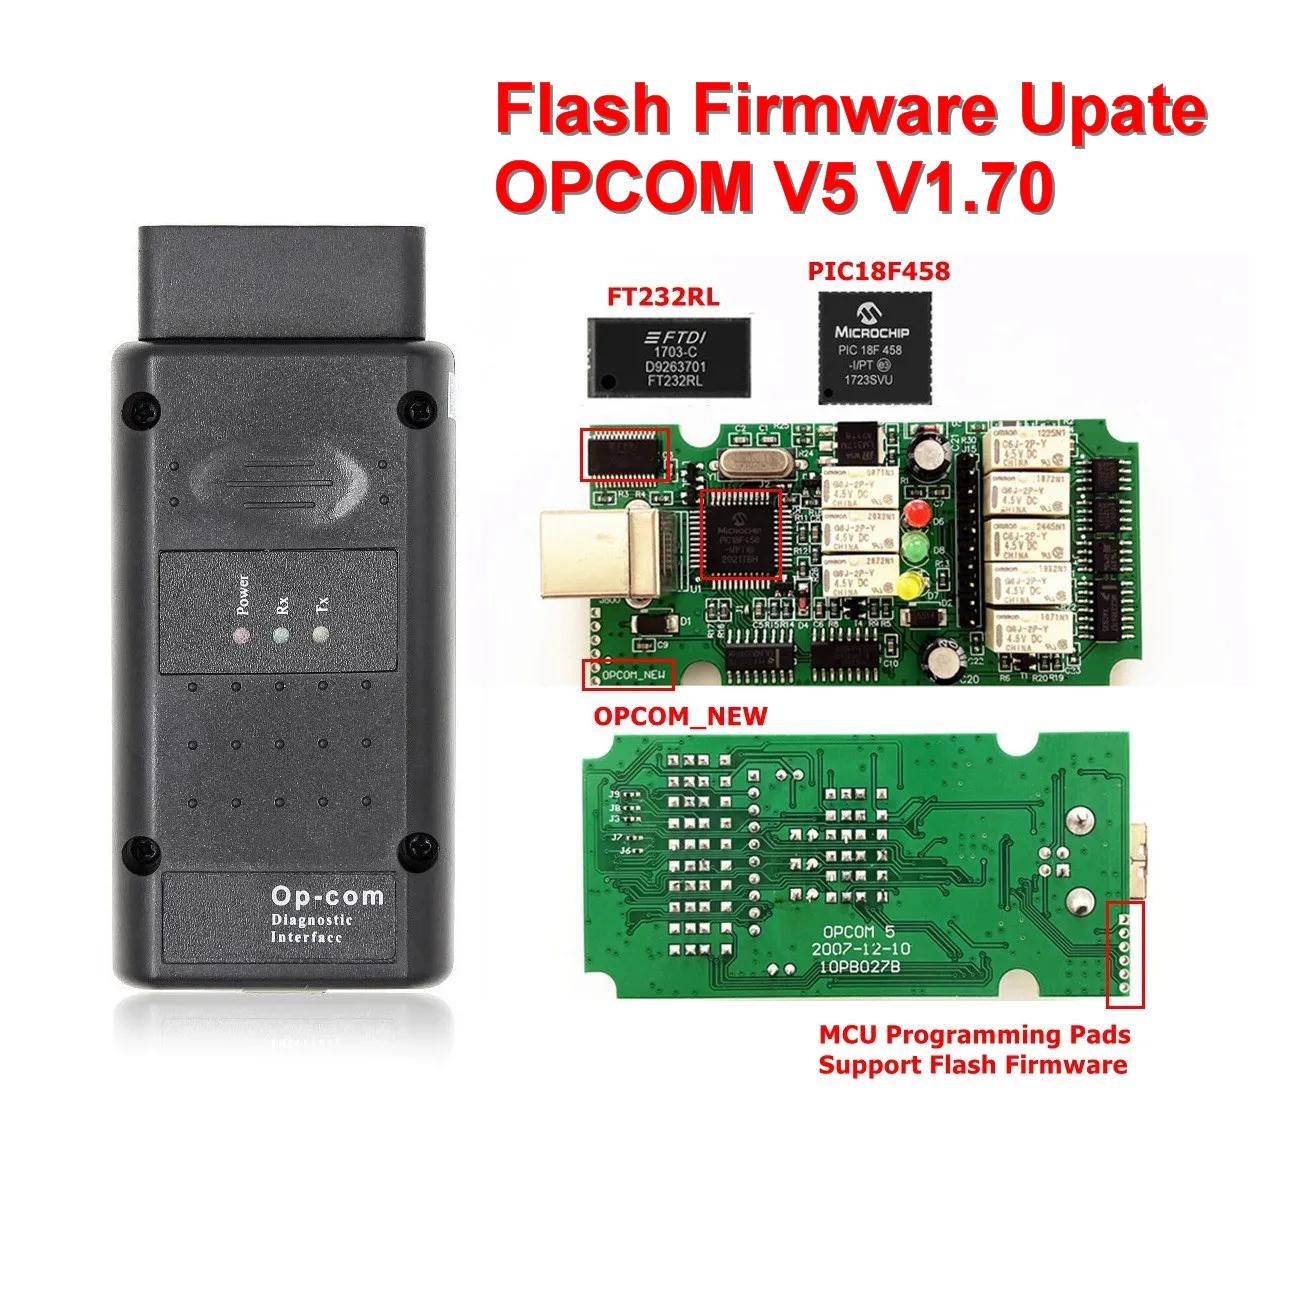 OPCOM ڵ  ̺, OPCOM V1.70 ÷ ߿ Ʈ, OPCOM V5, Opel OP-COM PIC18F458 CAN BUS OBD2 ڵ , ǰ